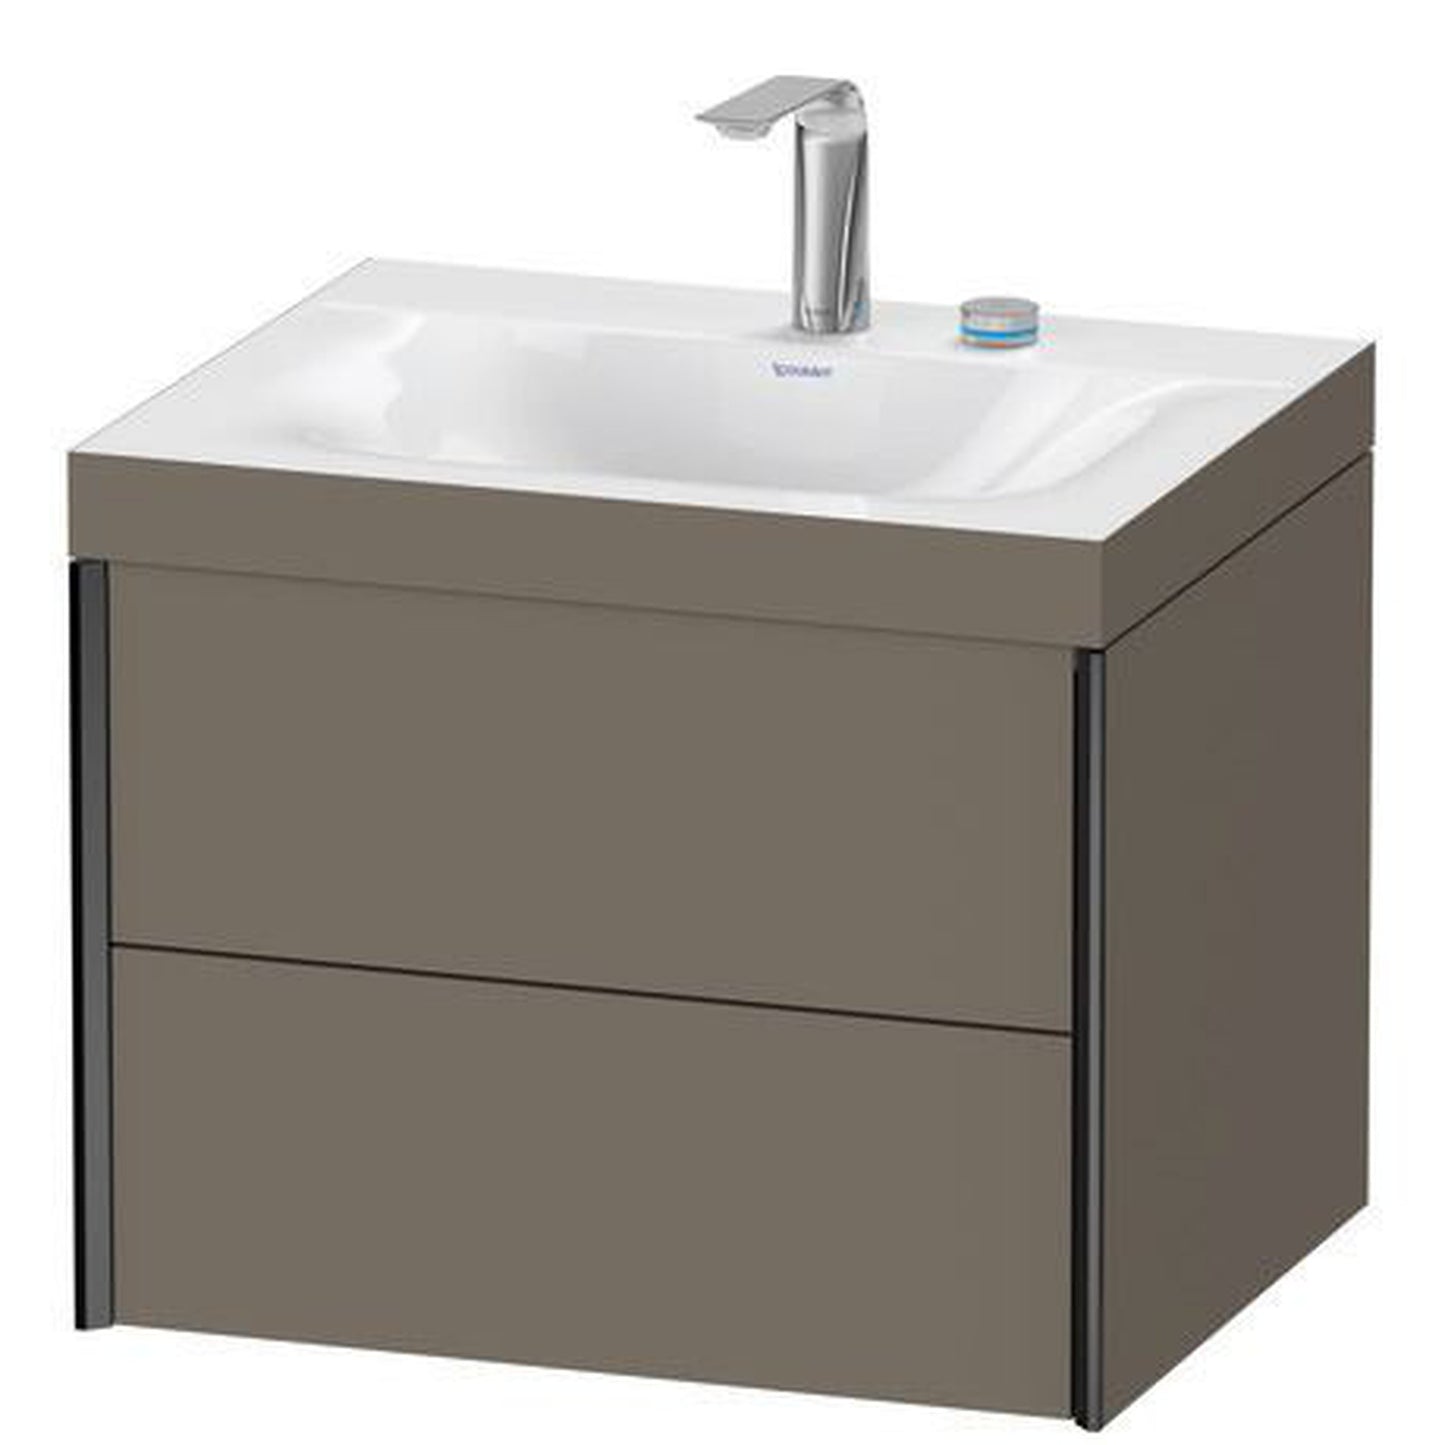 Duravit Xviu 24" x 20" x 19" Two Drawer C-Bonded Wall-Mount Vanity Kit With Two Tap Holes, Flannel Gray (XV4614EB290C)